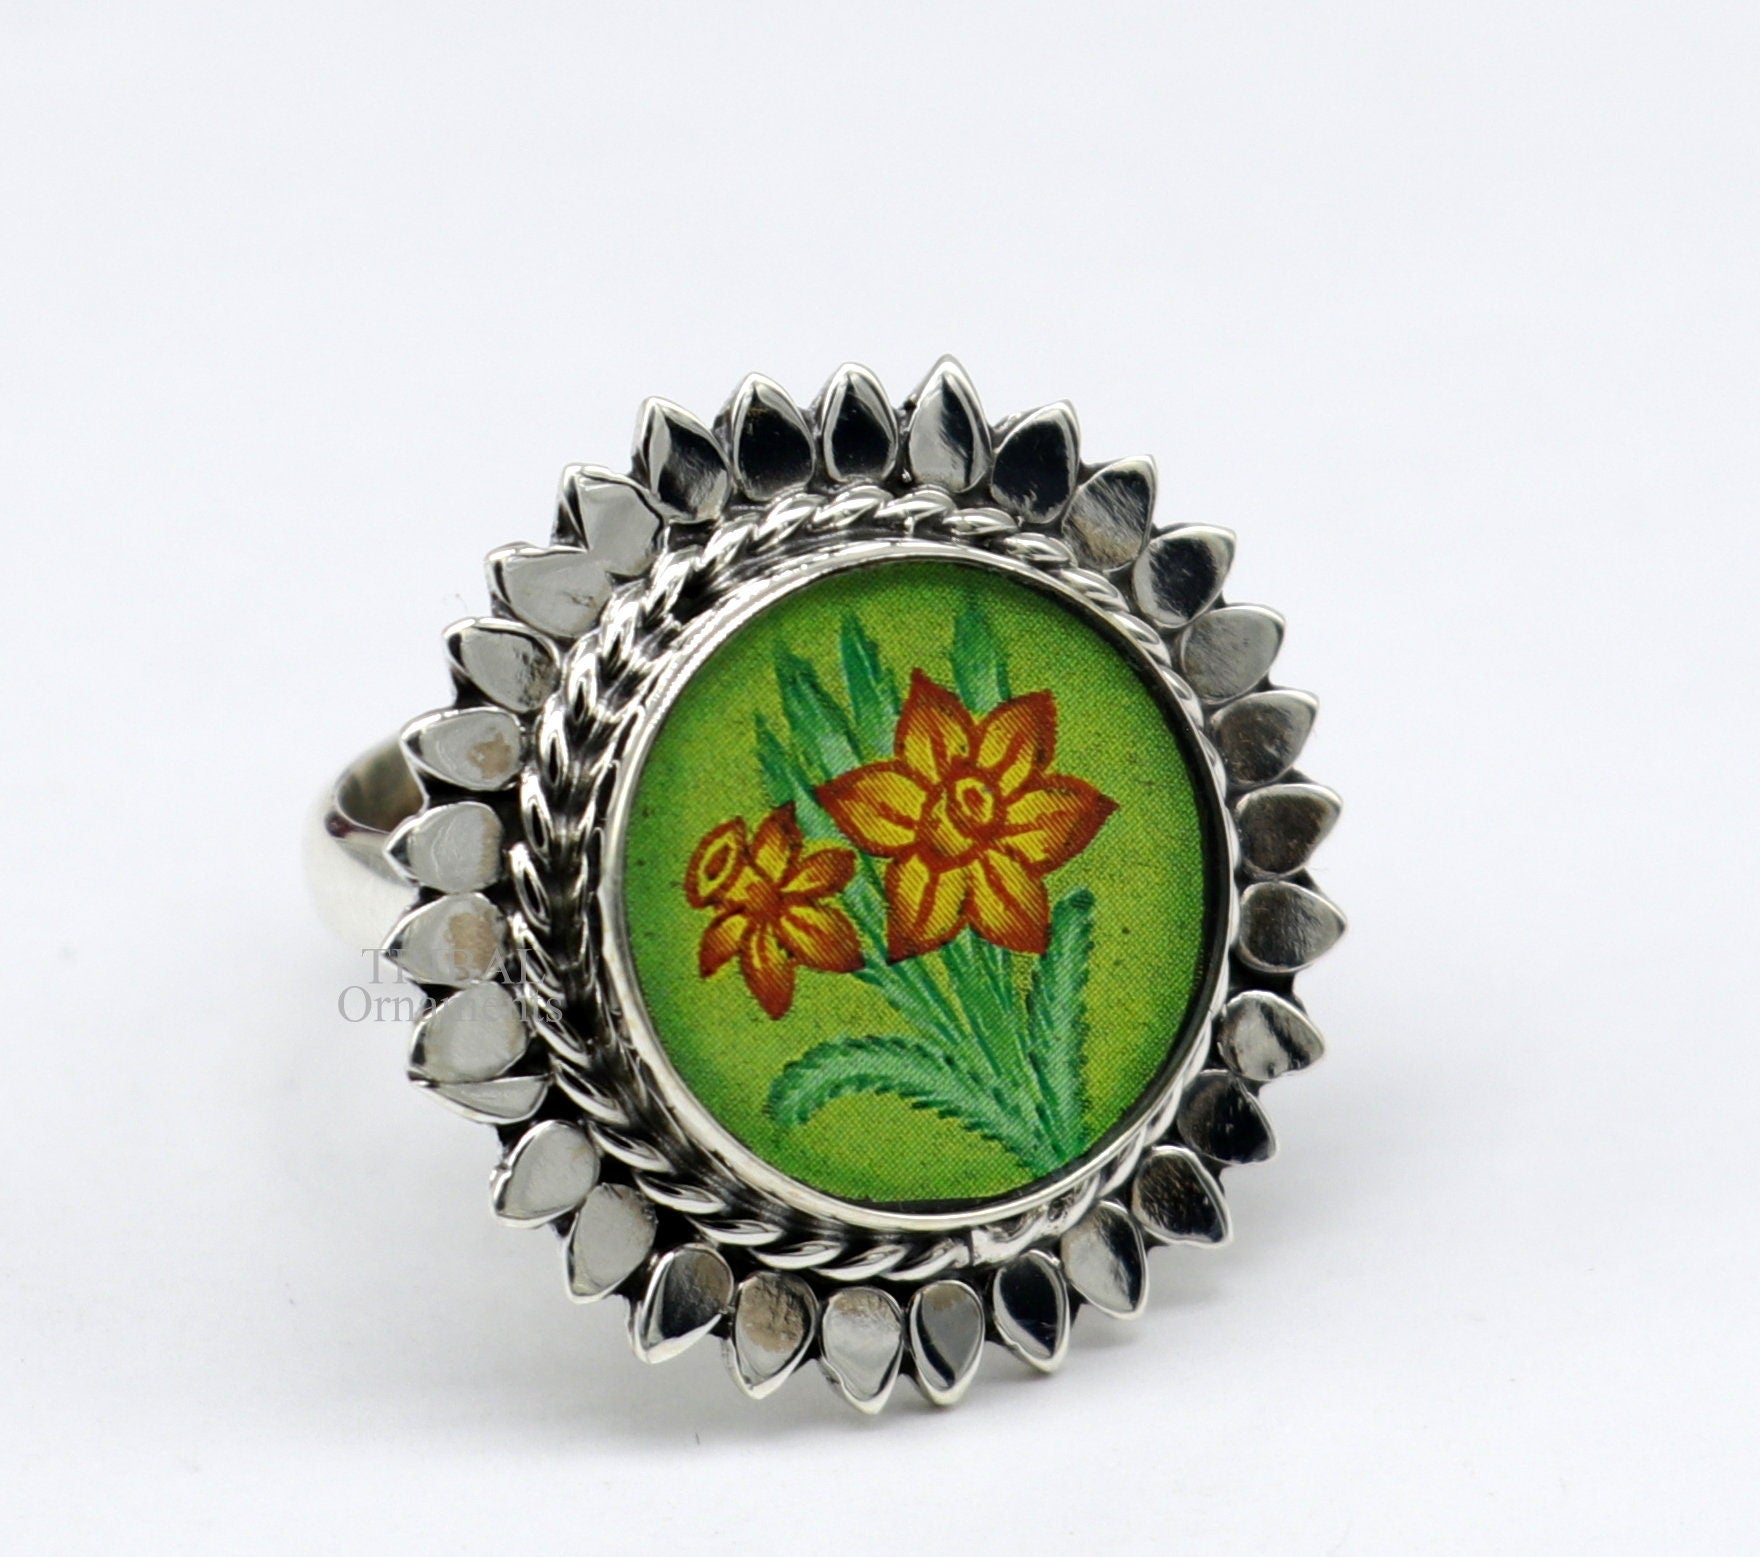 925 sterling silver adjustable ring band with fabulous flower painting ring unisex India jewelry ring552 - TRIBAL ORNAMENTS